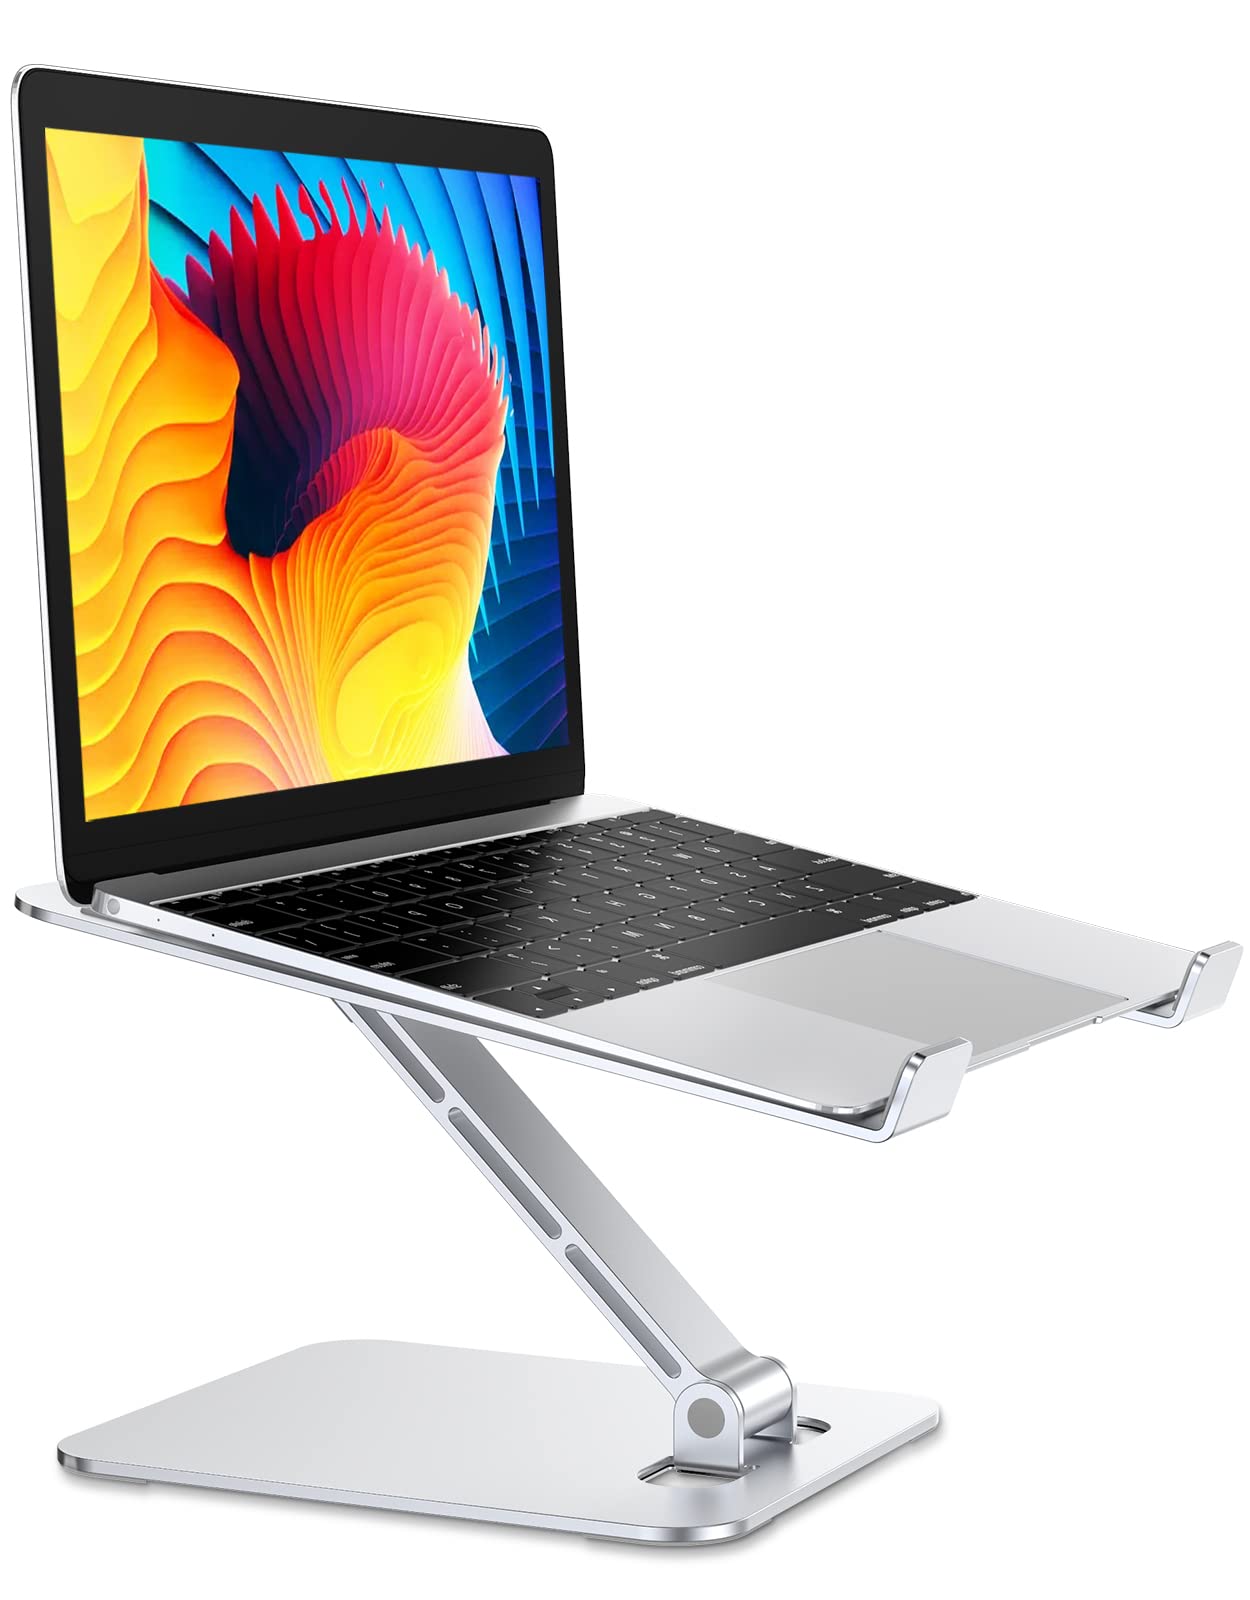 Glangeh Laptop Stand, Adjustable Ergonomic Portable Aluminum Laptop Riser, Foldable Computer Stand Compatible with MacBook Air Pro, Samsung, Sony, Dell, ASUS, Lenovo, HP, More 10-16" Laptops